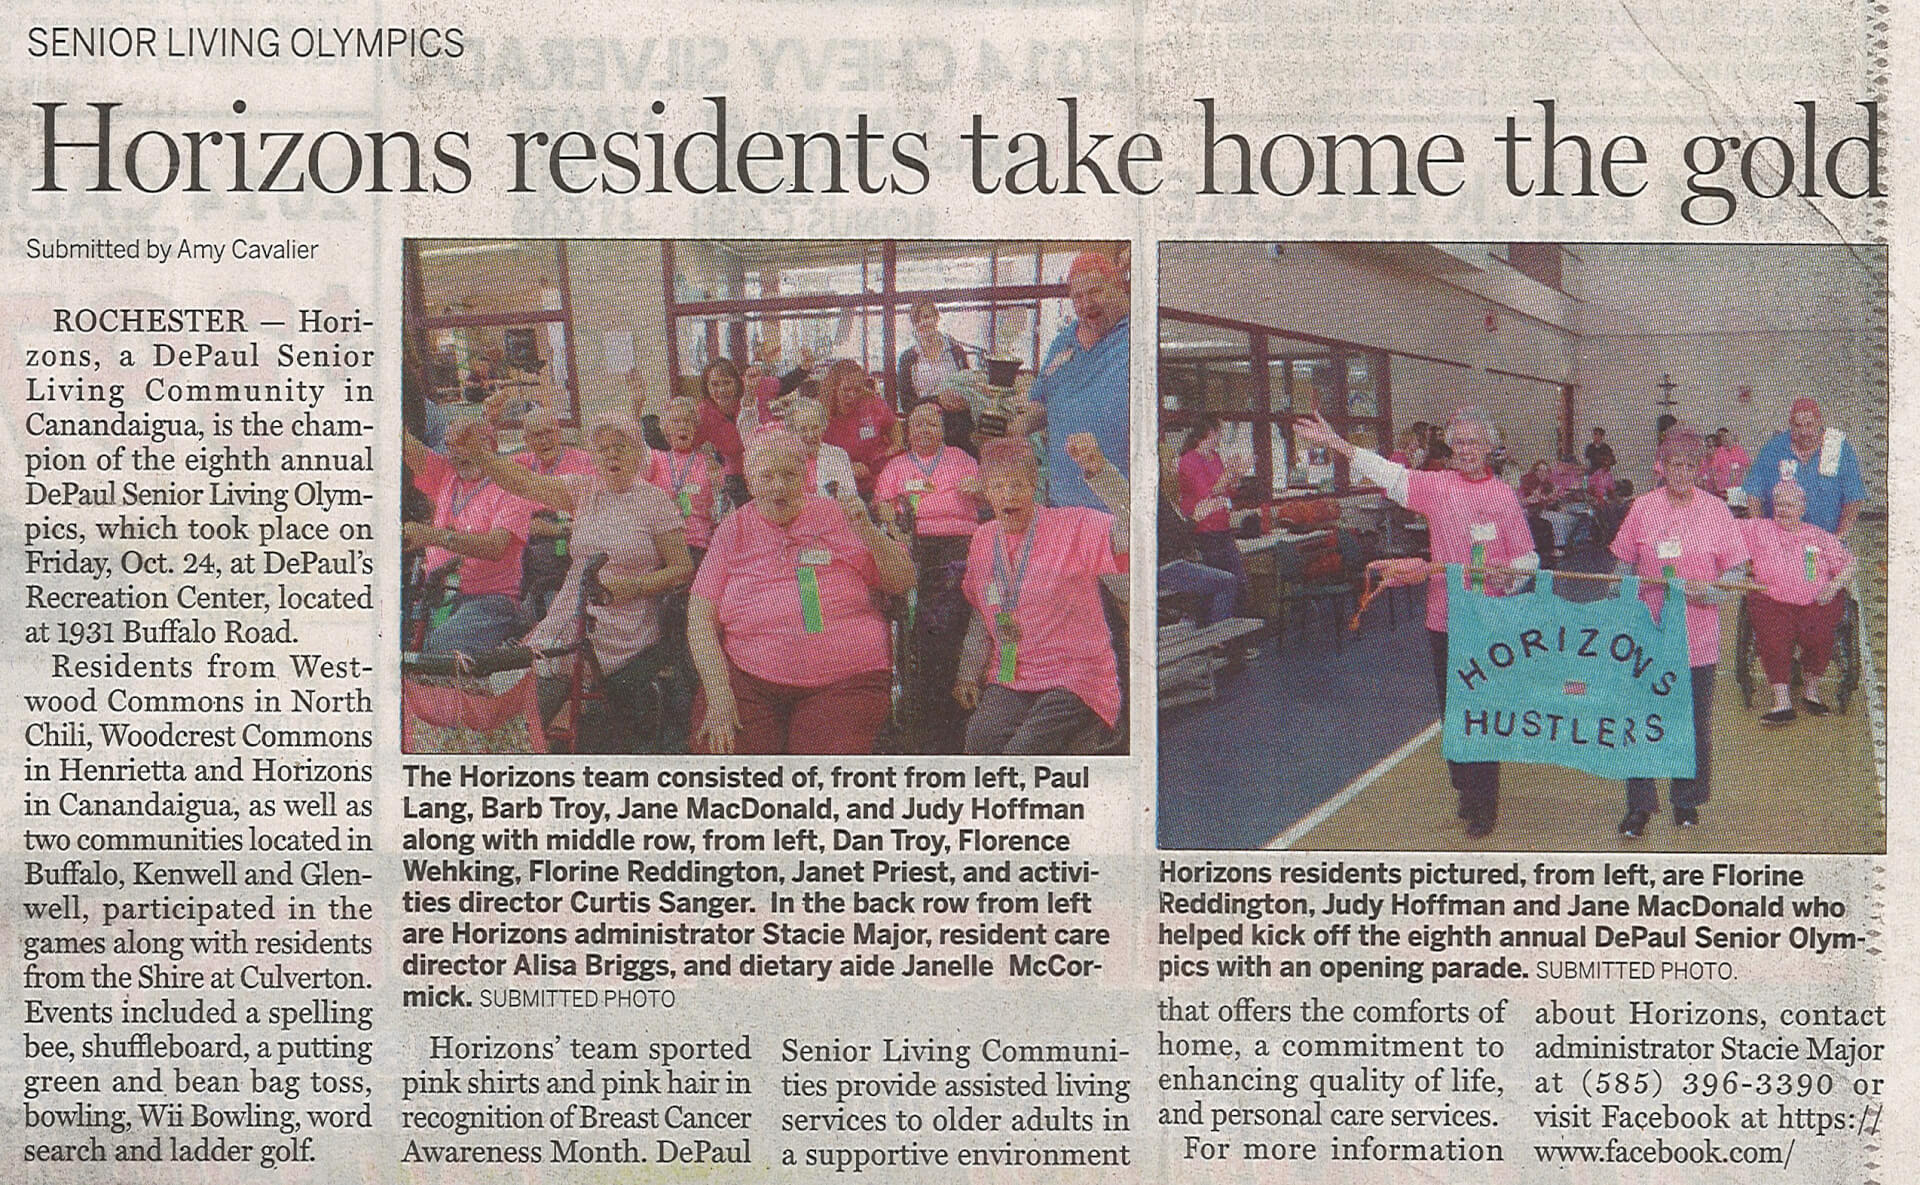 Horizons takes gold in the Senior Olympics article in the Daily Messenger November 18, 2014